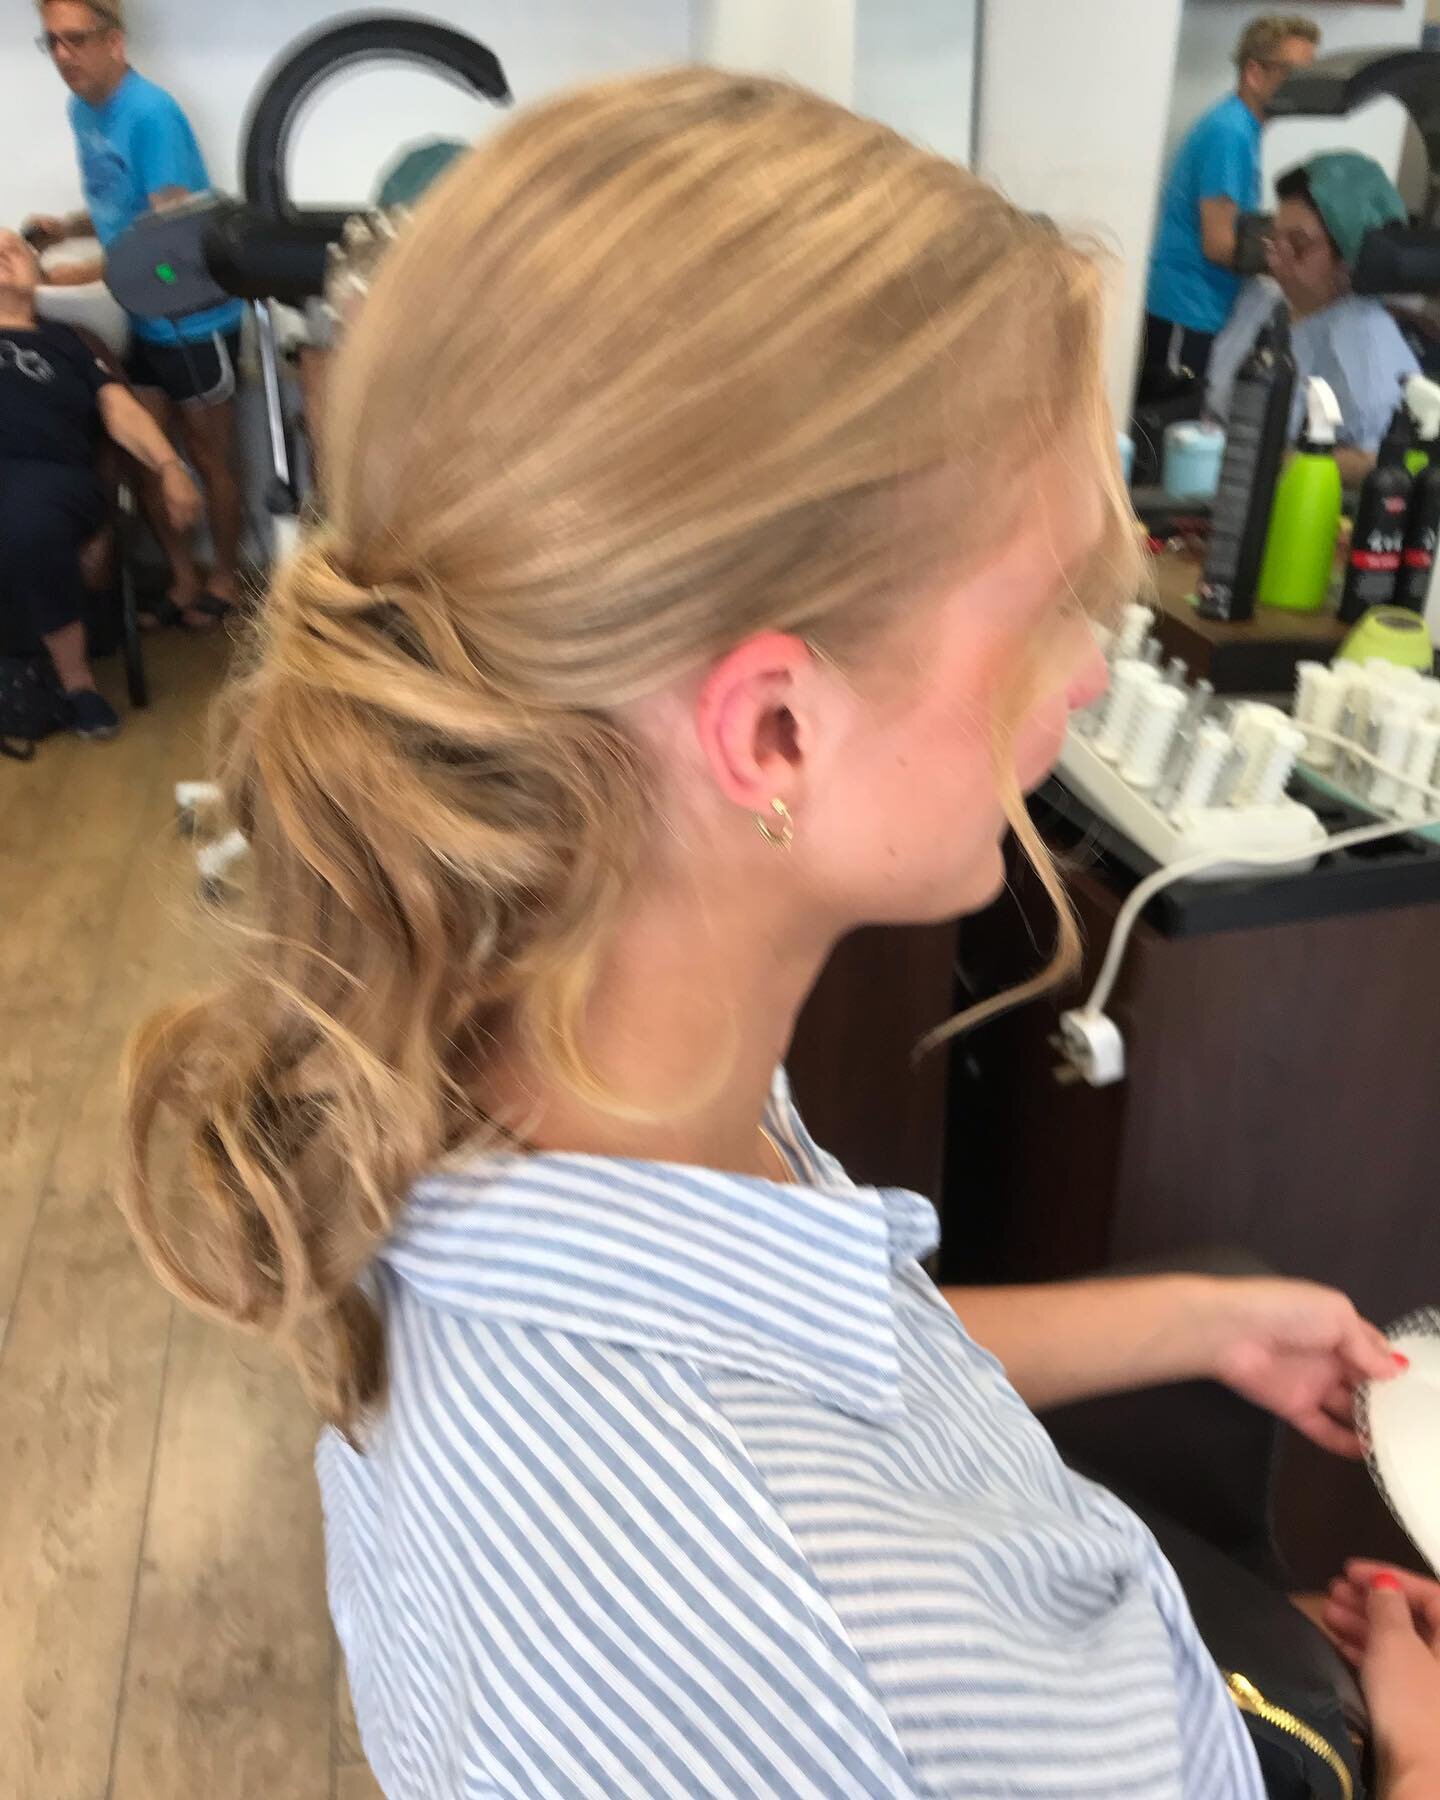 All ready for the races 🏇🎉 #royalascot #ascot #ascotraces #hairdresser #hairstylist #hairstyles #earlsfield #earlsfieldhair #southlondonhairdresser #londonhairdresser